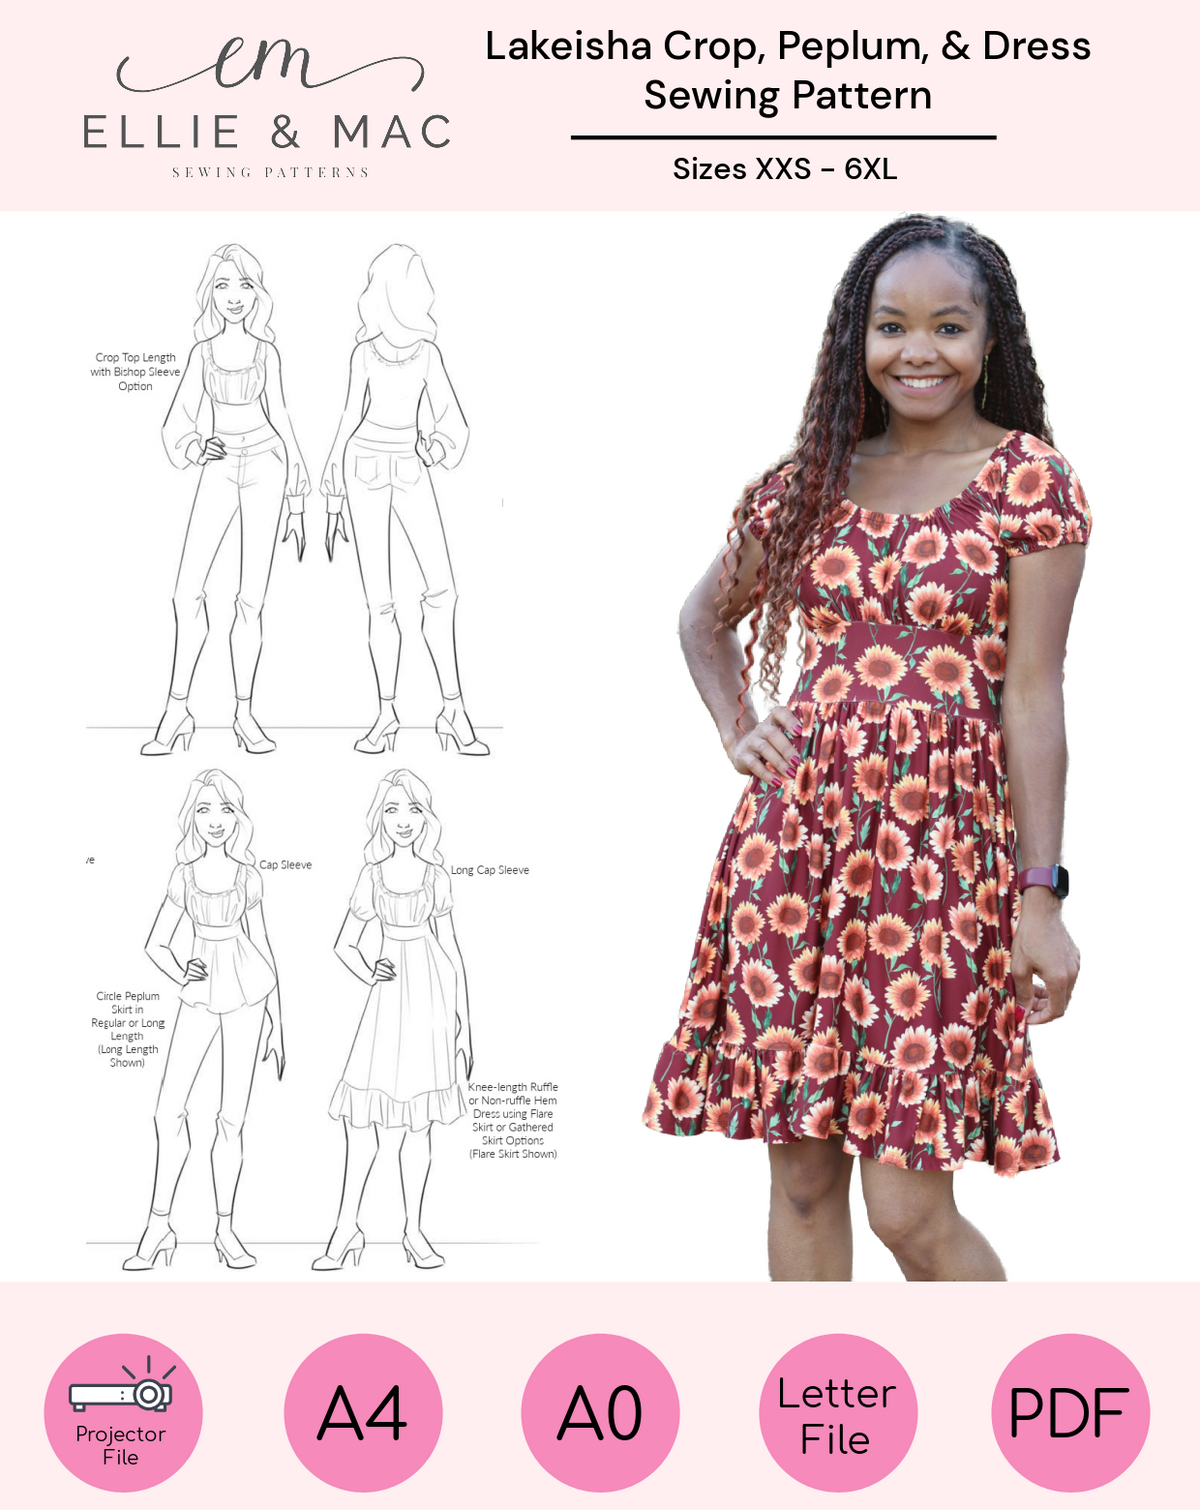 FREE PATTERN ALERT: 15+ Fall sewing patterns for women | On the Cutting  Floor: Printable pdf sewing patterns and tutorials for women